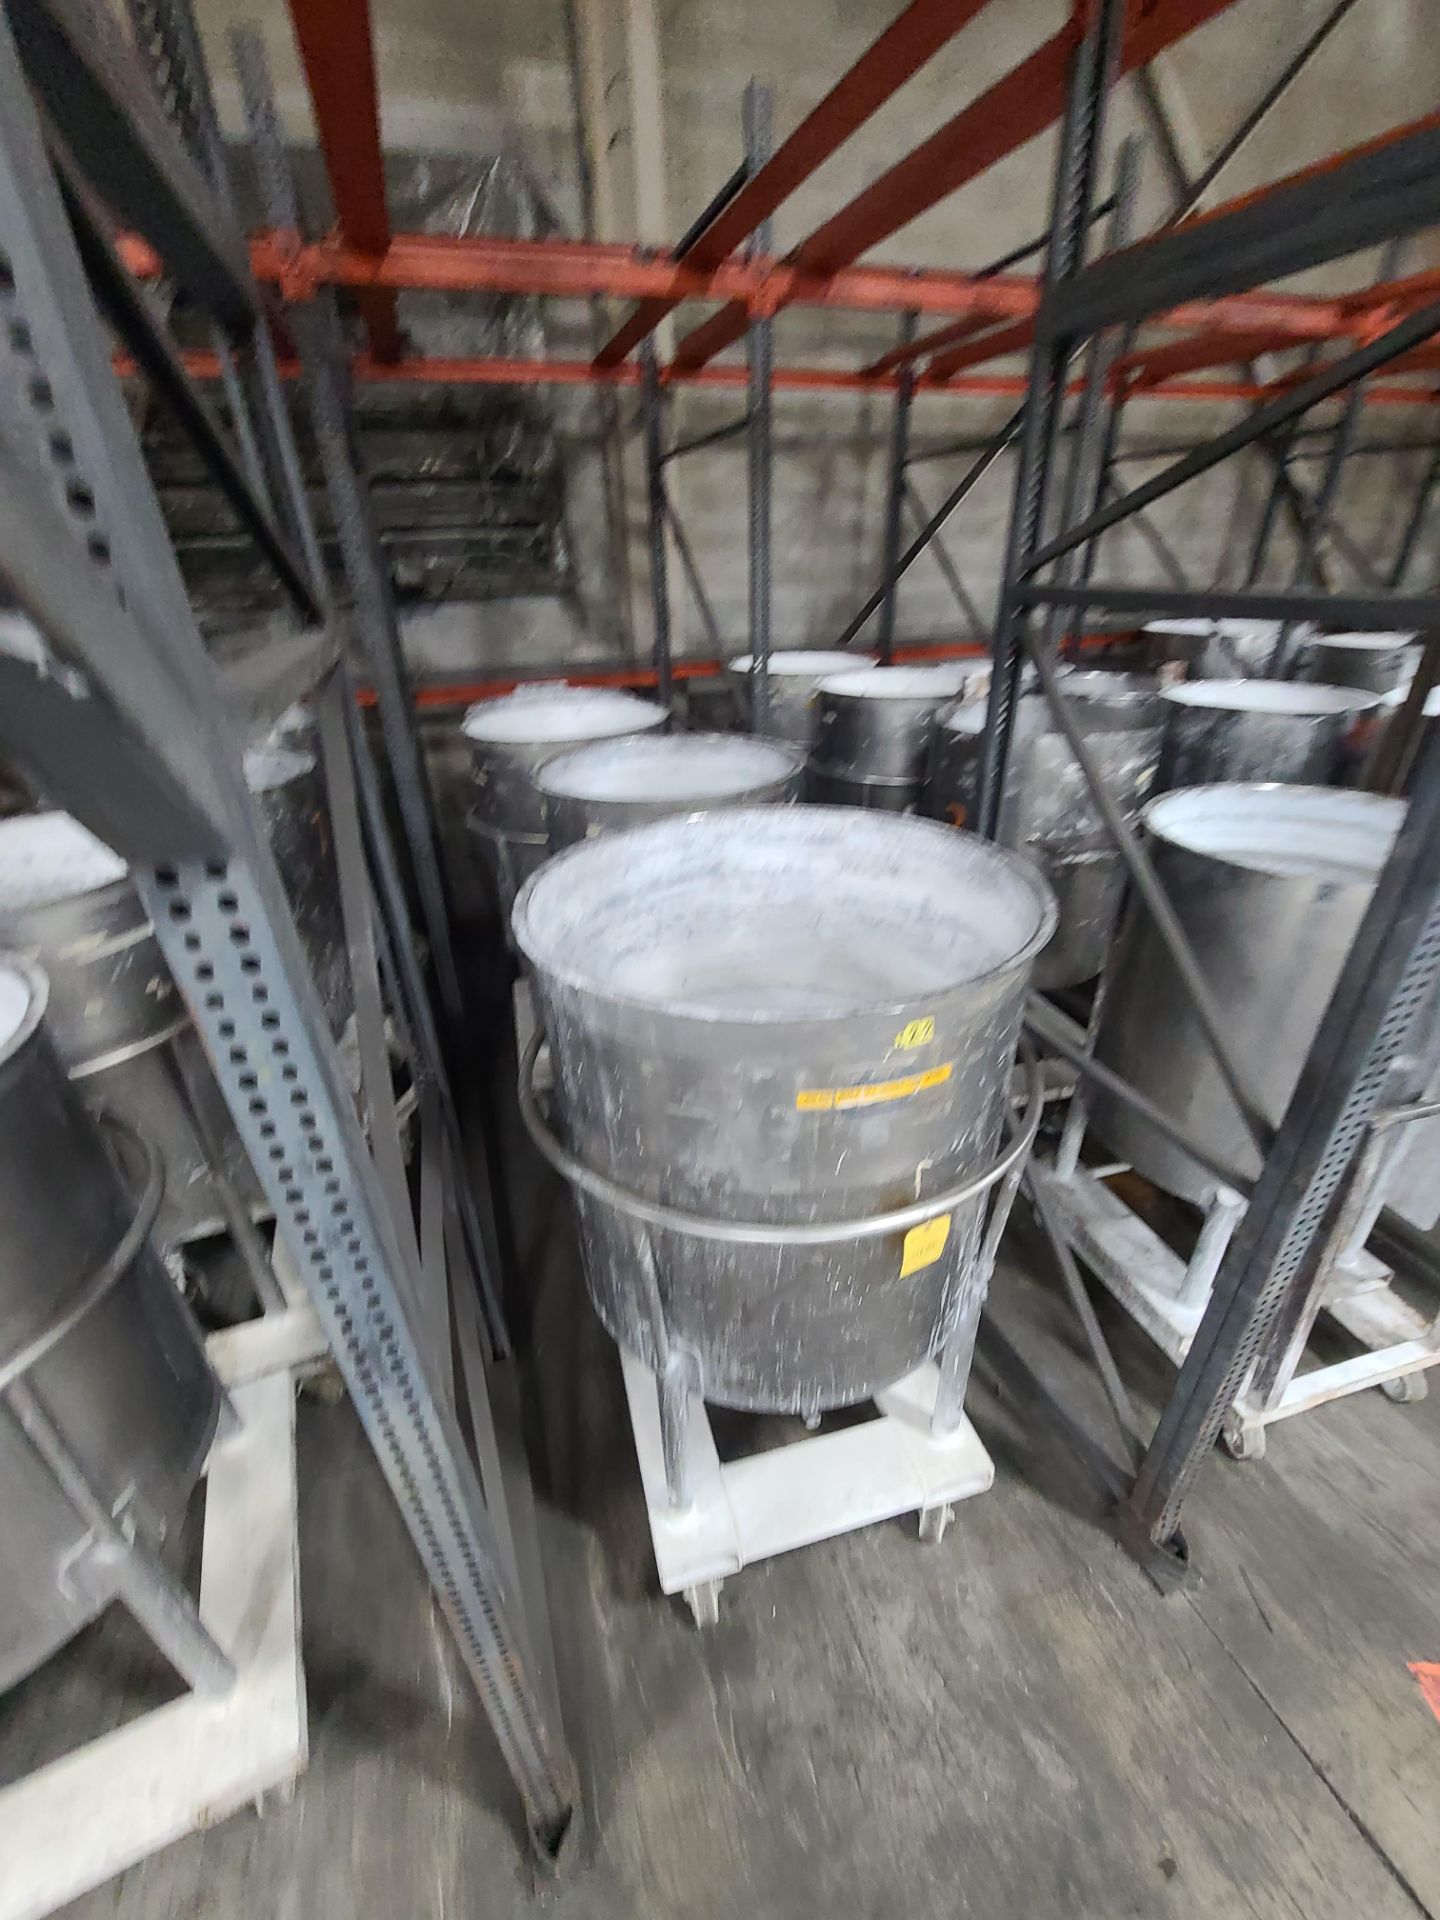 (4) STAINLESS STEEL MIXING TANKS 100-125 GALLON - Image 2 of 2